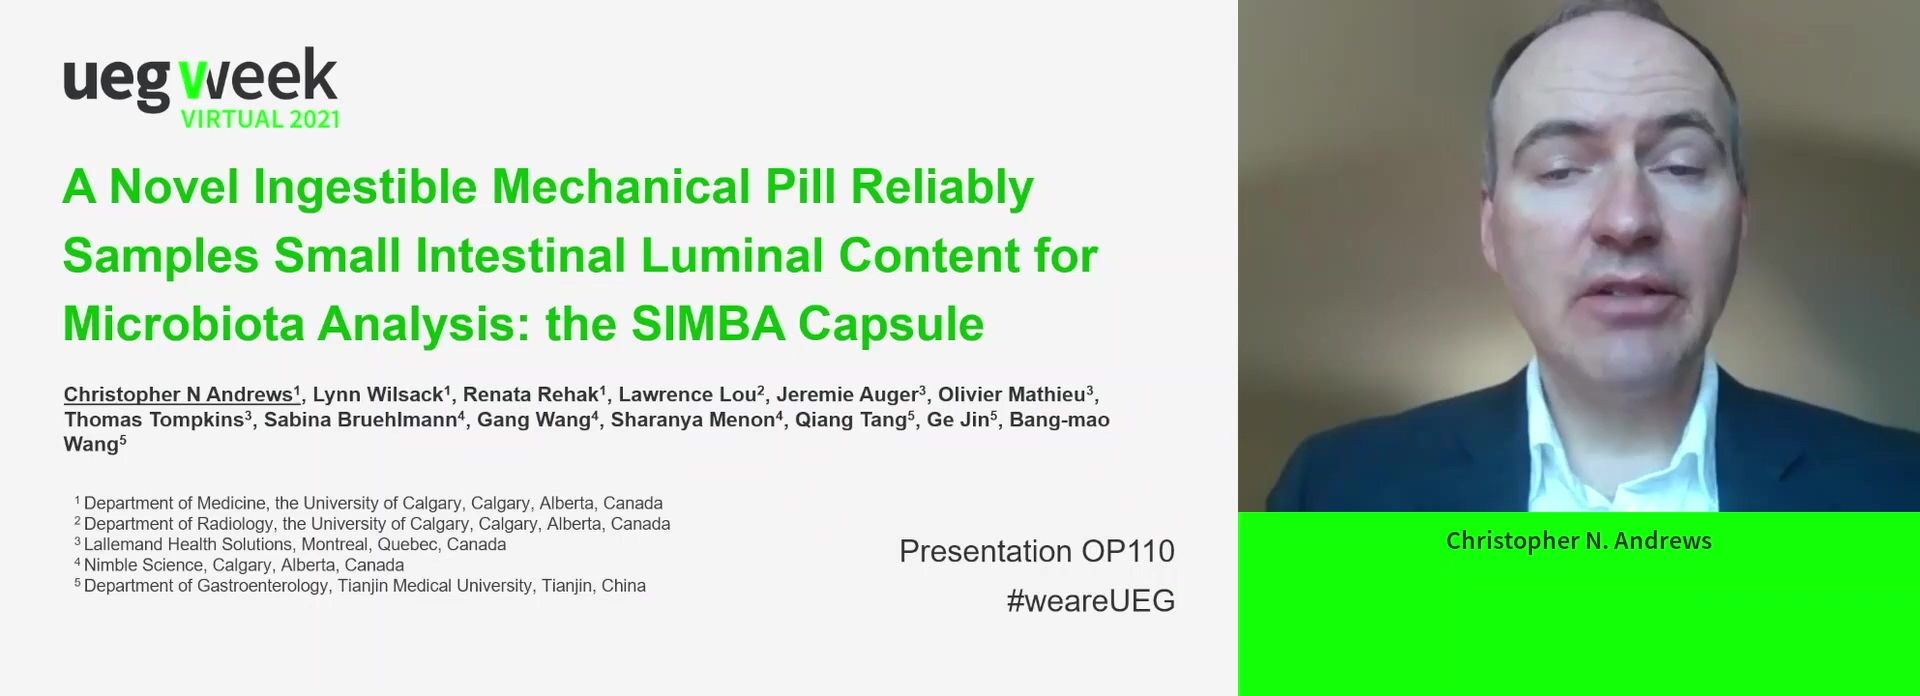 A NOVEL INGESTIBLE MECHANICAL PILL RELIABLY SAMPLES SMALL INTESTINAL LUMINAL CONTENT FOR MICROBIOTA ANALYSIS: THE SIMBA CAPSULE